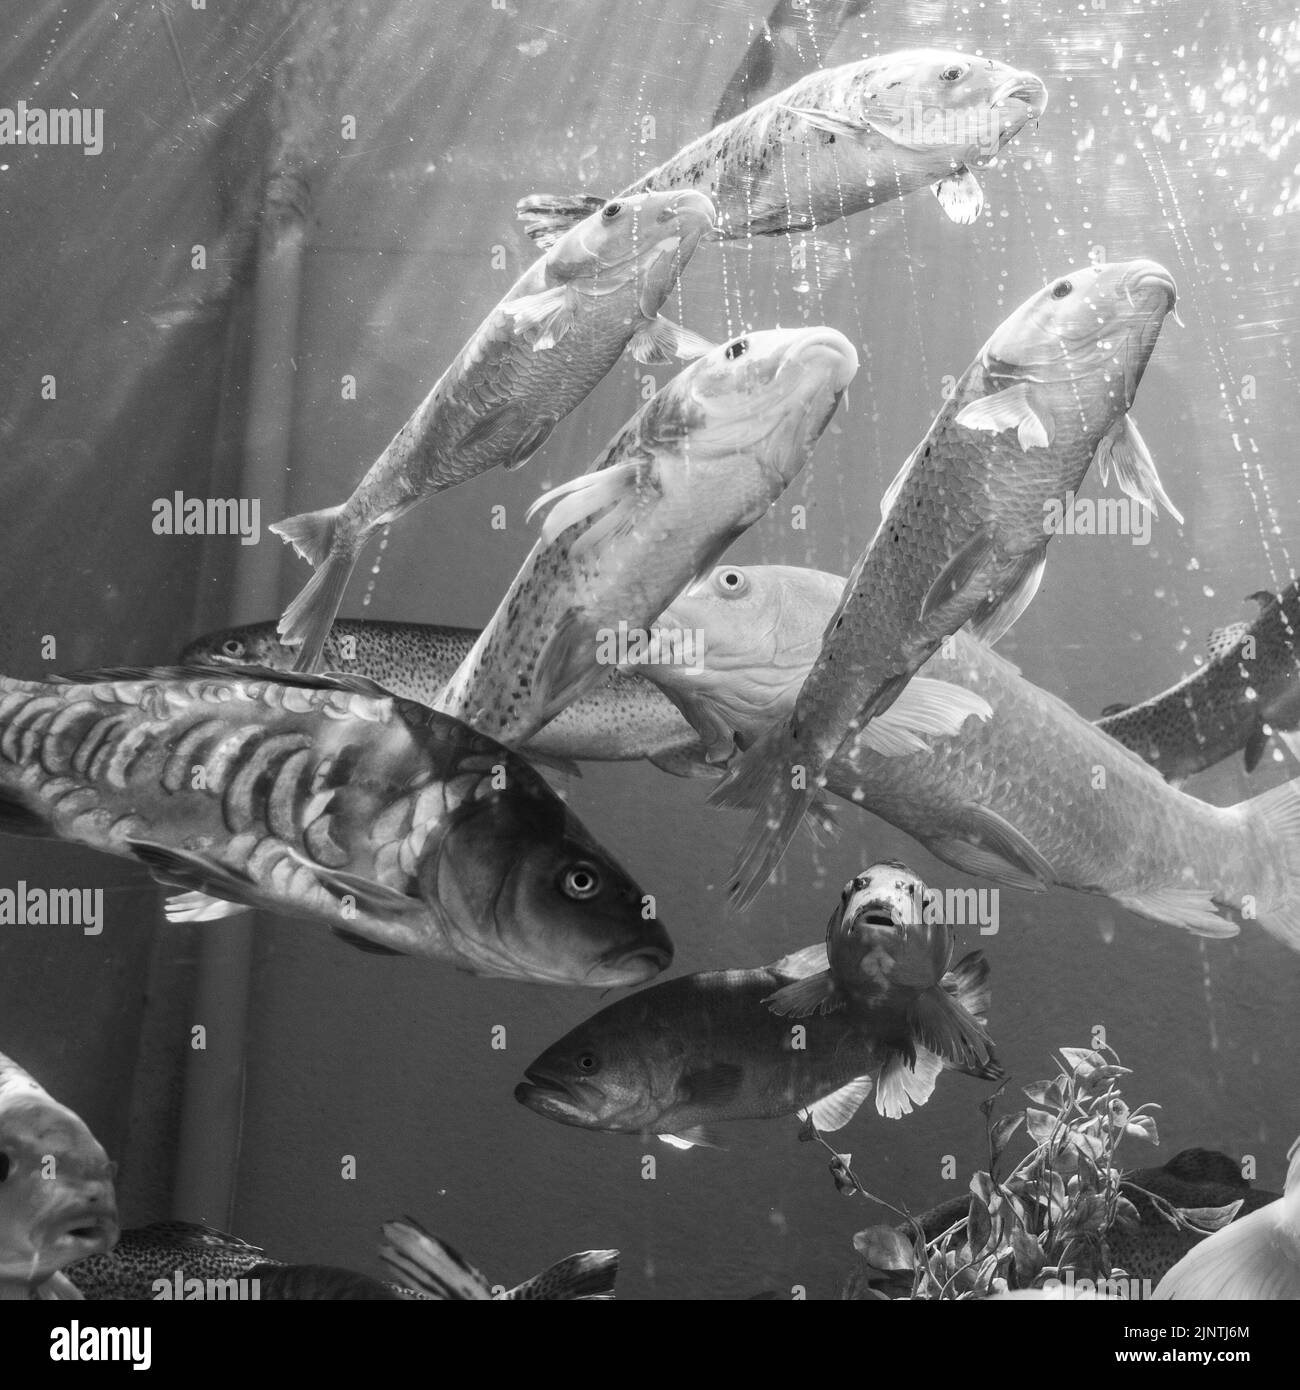 Fish tank black and white with big fishes swimming close-up Stock Photo